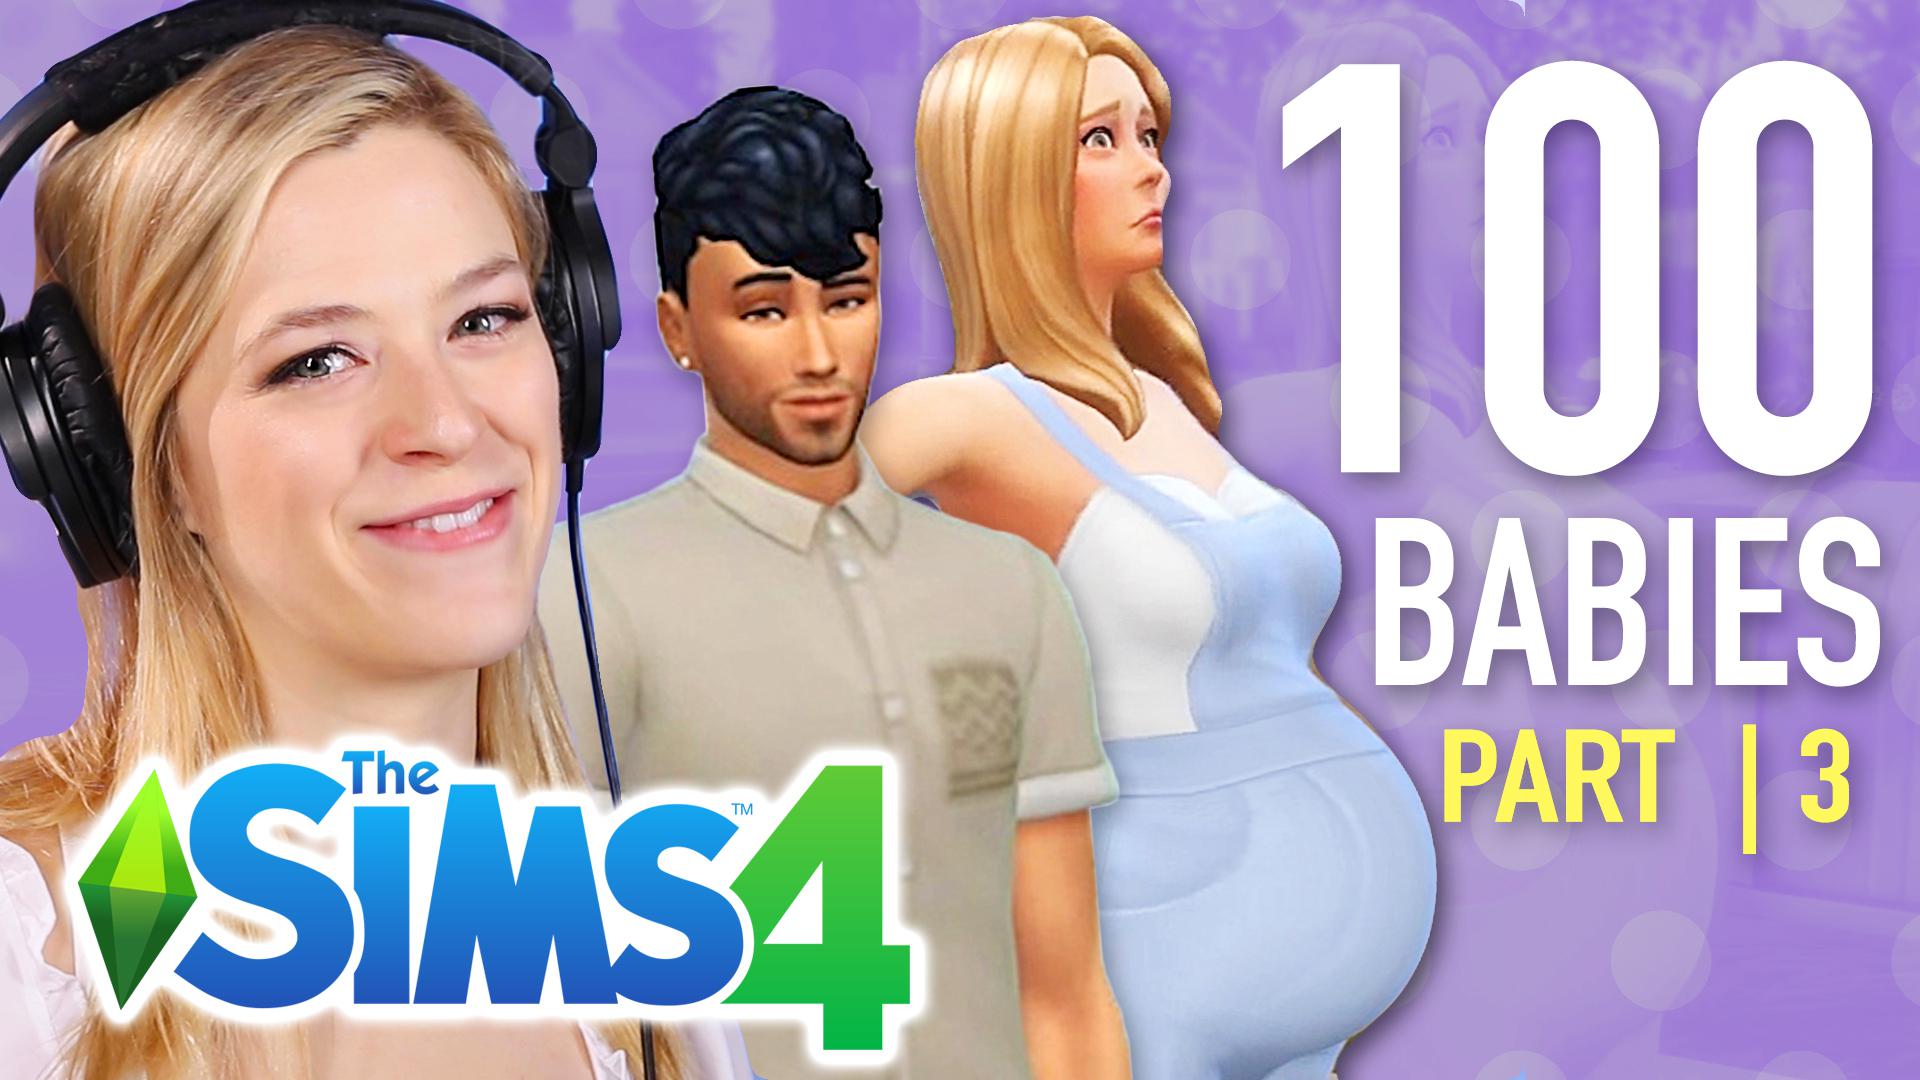 Buzzfeed Video Single Girl Tries The 100 Baby Challenge In The Sims 4 Part 3